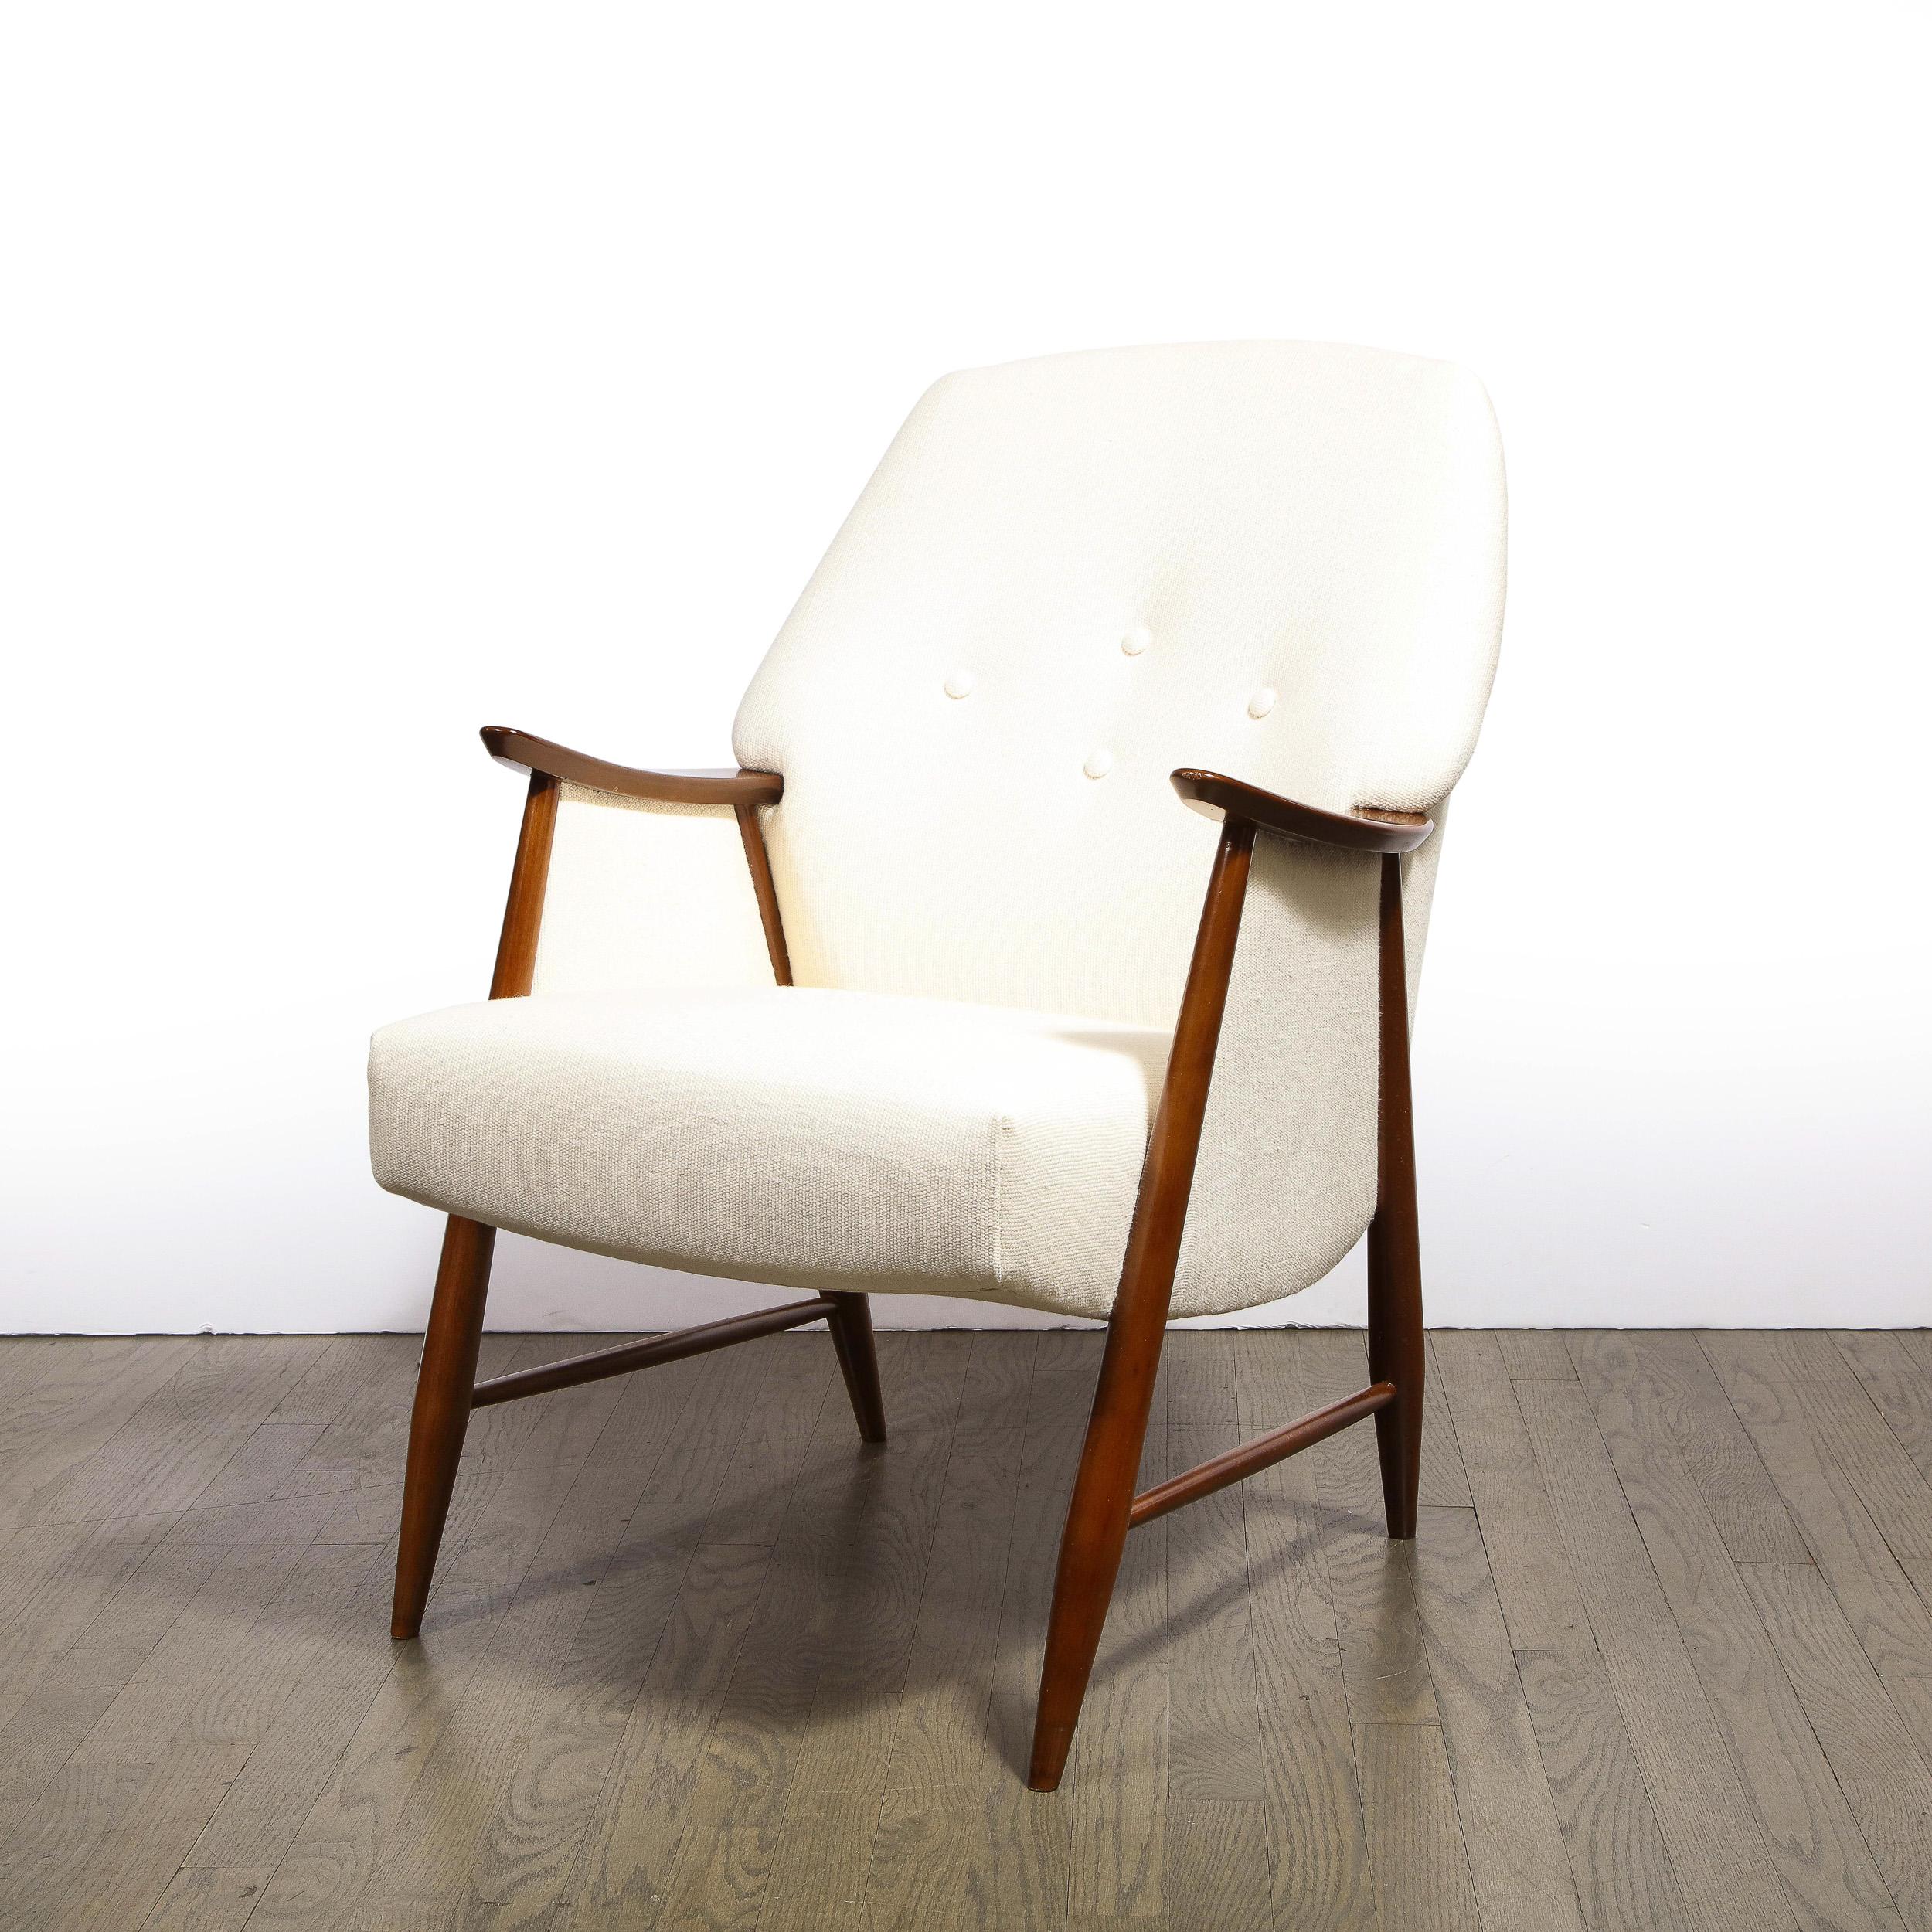 This elegant pair of Mid-Century Modern arm chairs were realized in Sweden, circa 1950. They offer a graphic silhouette, boasting a hand rubbed walnut frame with splayed legs connected by a cylindrical cross slat; saddle arms (named for their